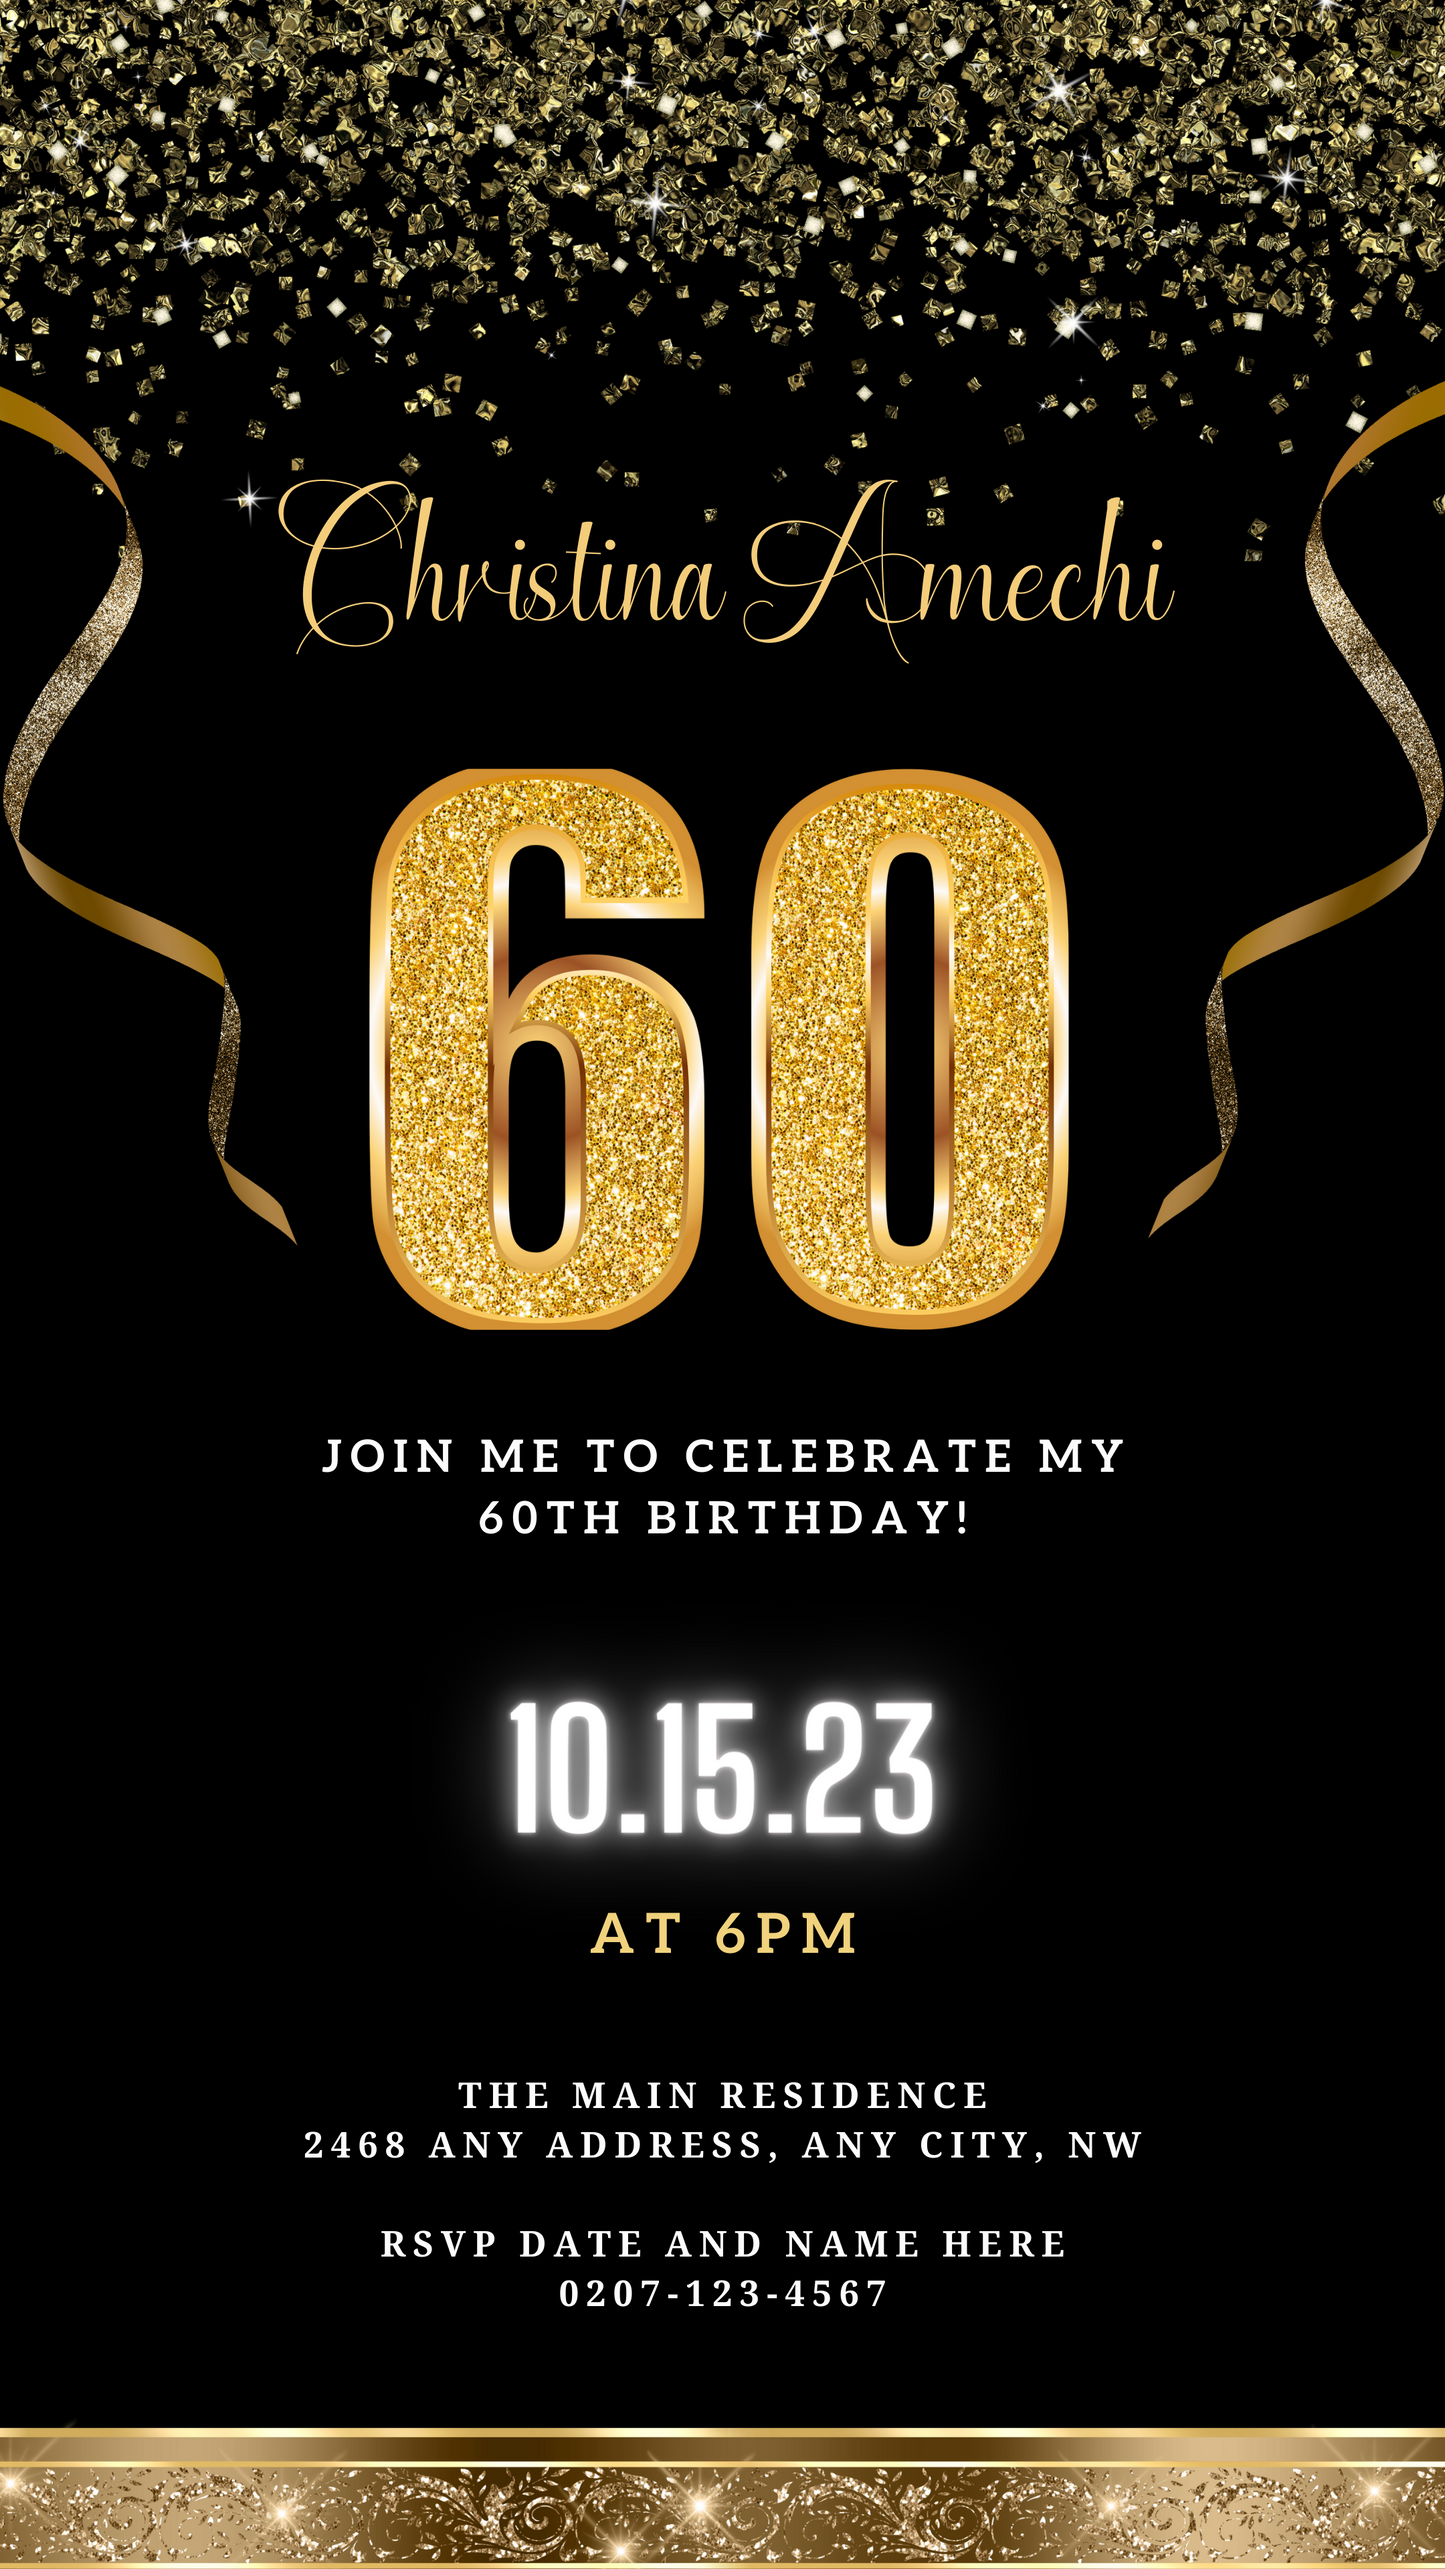 Black Gold Confetti 60th Birthday Evite with customizable gold text and ribbons, ideal for digital invitations via smartphone, editable in Canva.